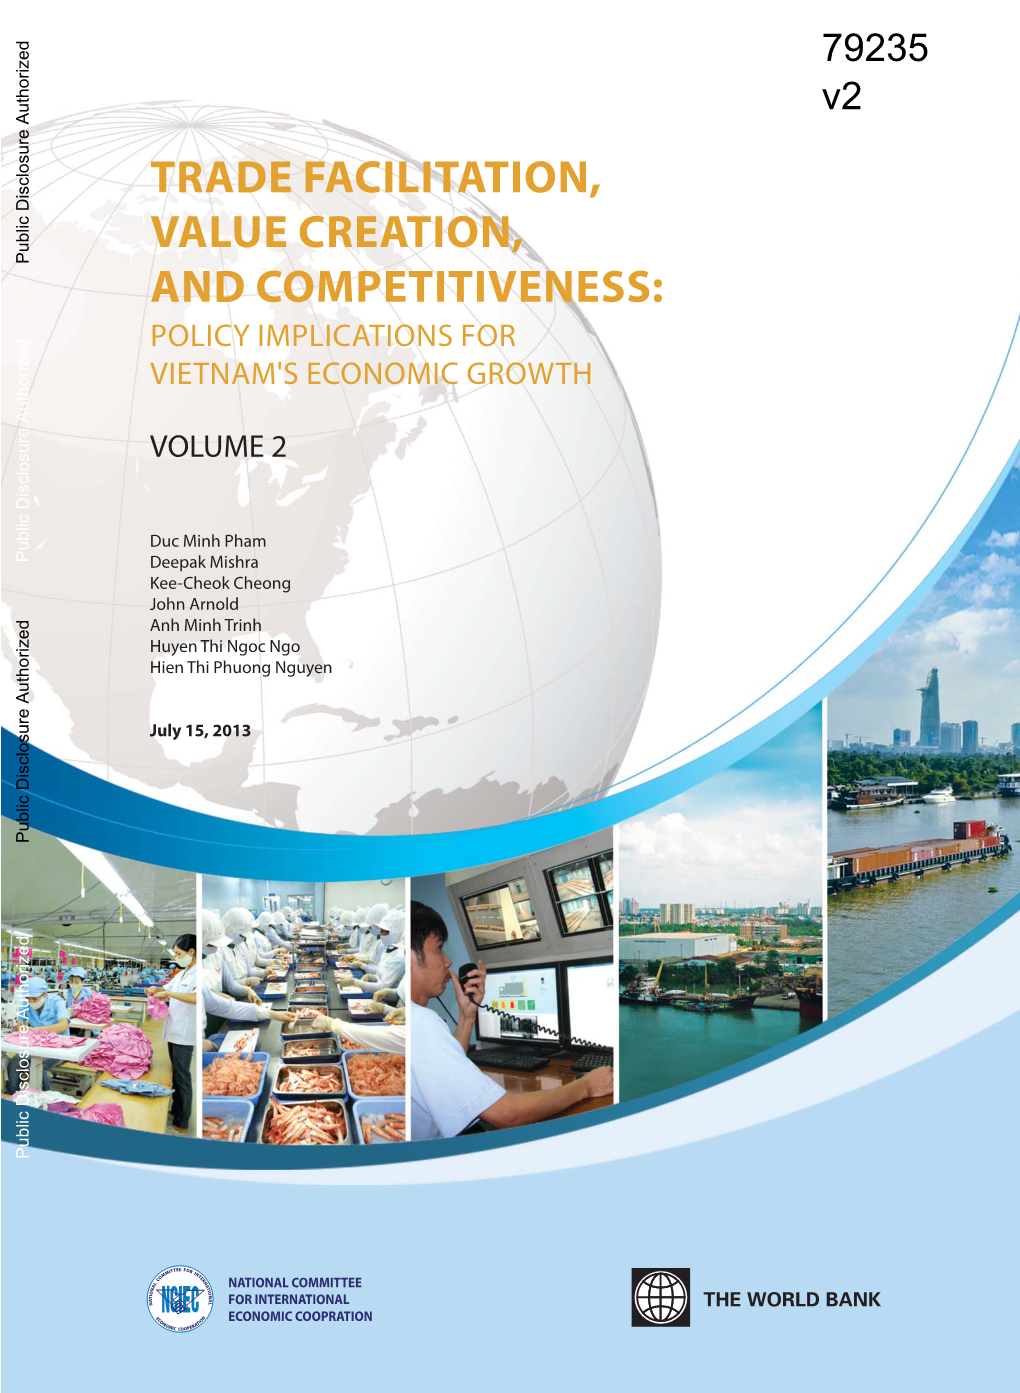 Trade Facilitation, Value Creation, and Competitiveness: Policy Implications for Vietnam's Economic Growth